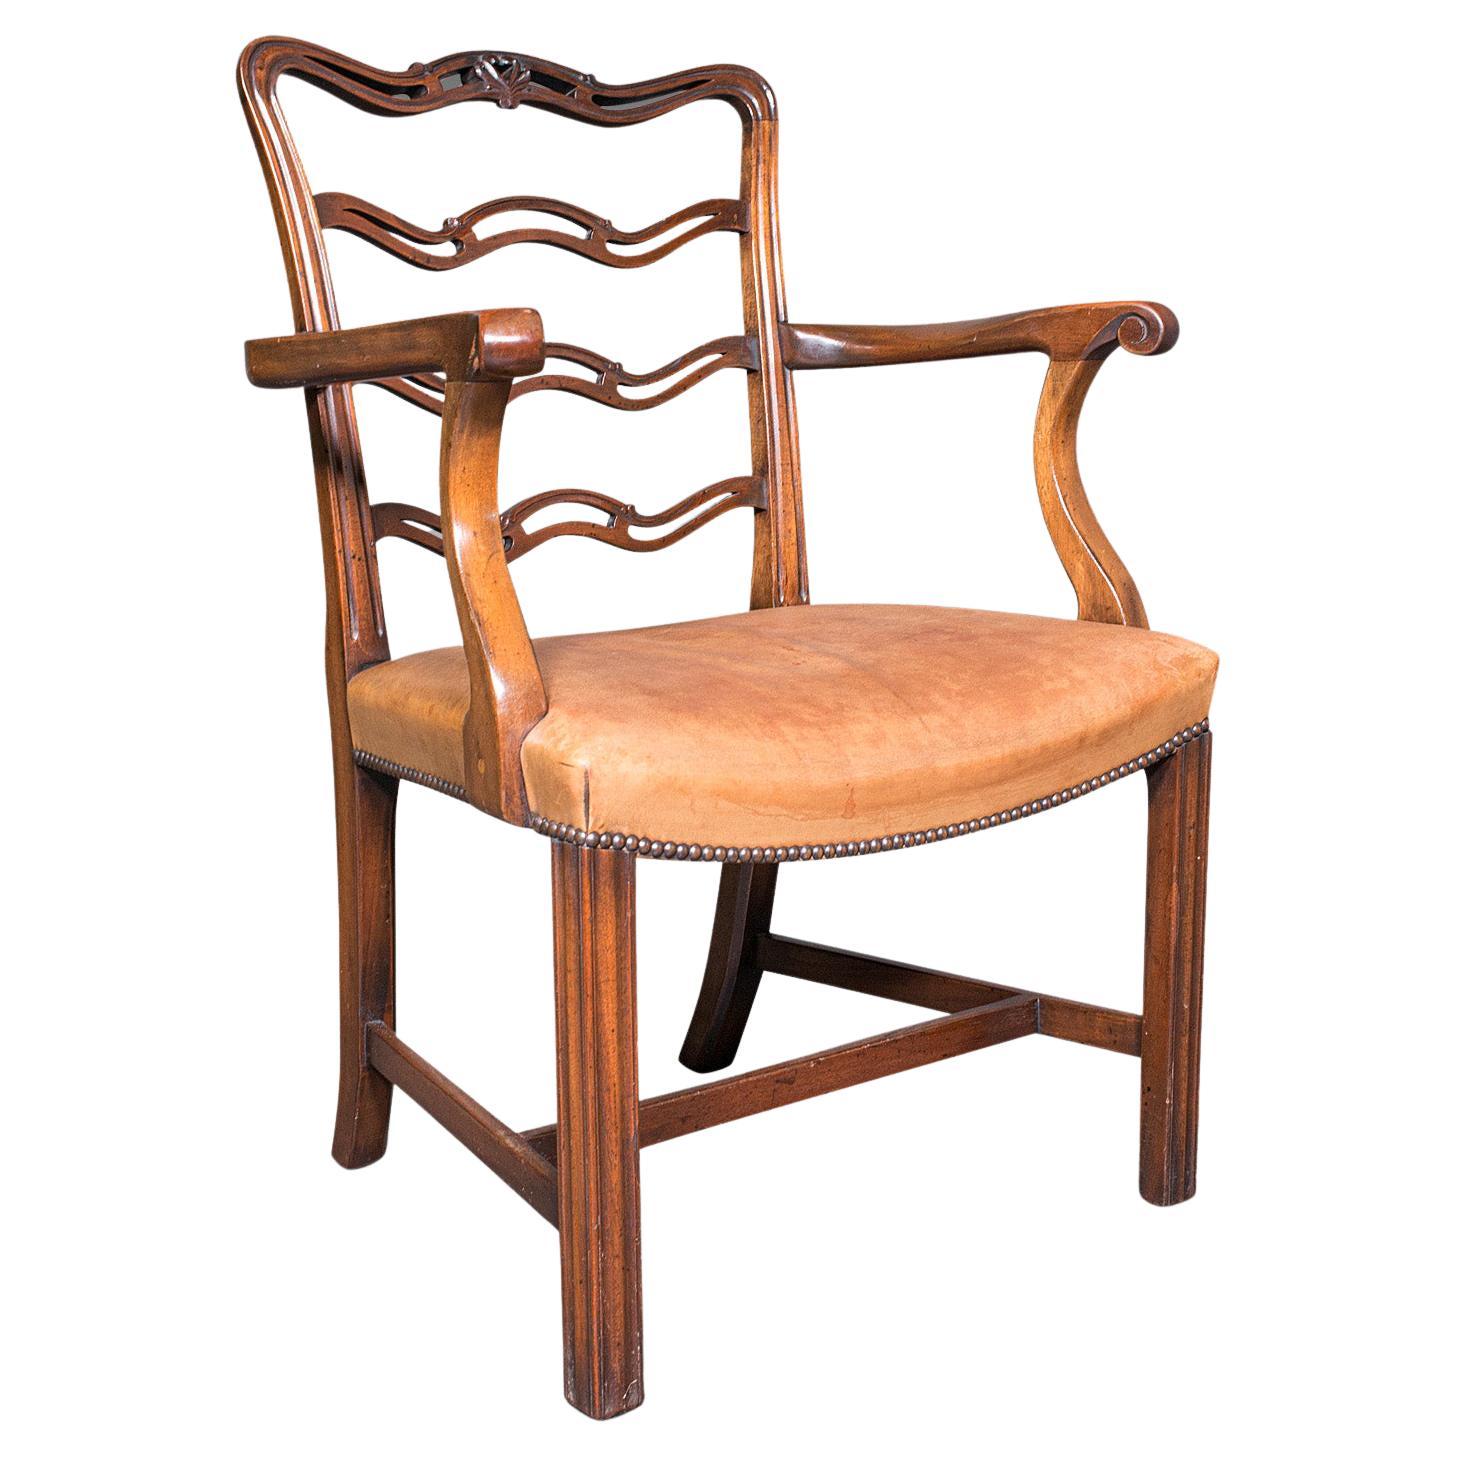 Vintage Ladder Back Study Chair, Irish, Leather, Elbow Seat, Carver, Art Deco For Sale